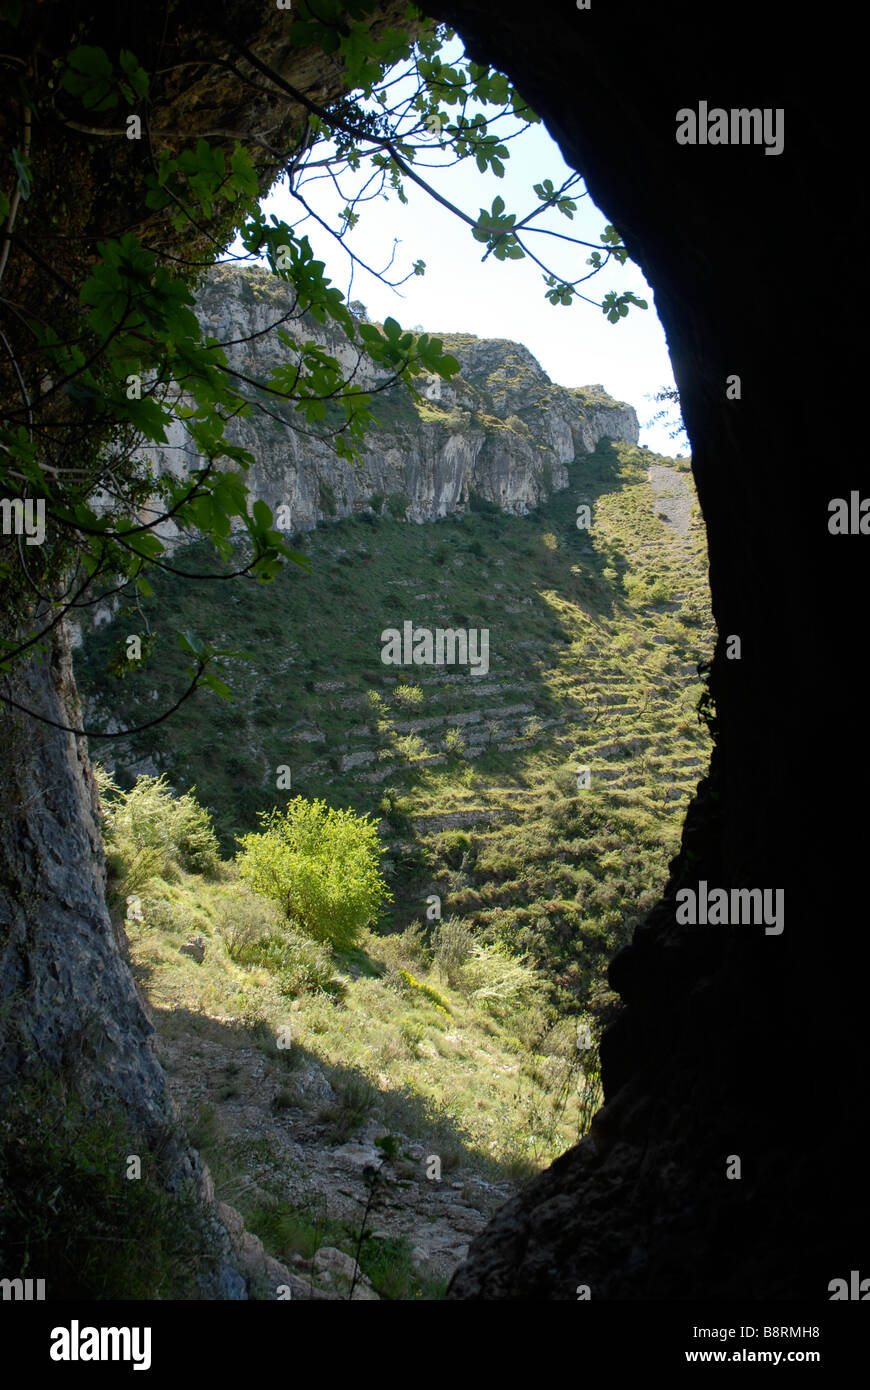 looking out of a cave, off Mozarabic trail, Vall de Laguart, Benimaurell, Alicante Province, Comunidad Valenciana, Spain Stock Photo